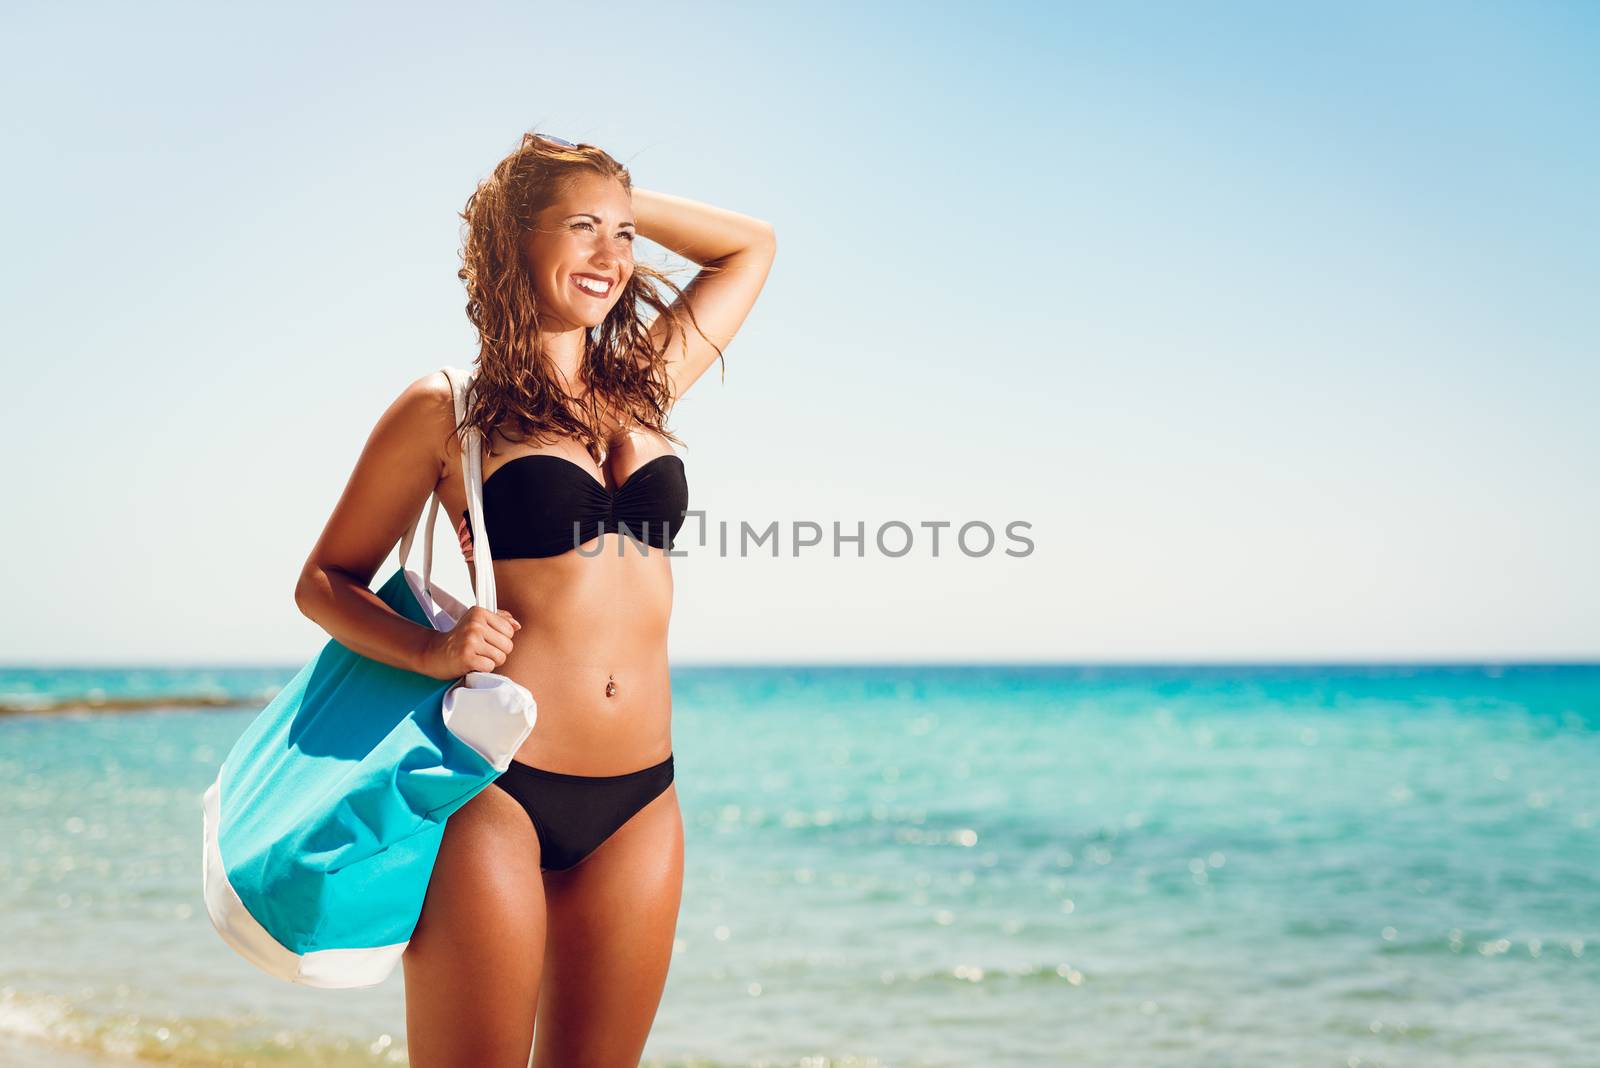 Portrait of a beautiful young woman enjoying on the beach. She is holding summer bag and looking away with smiling on her face.